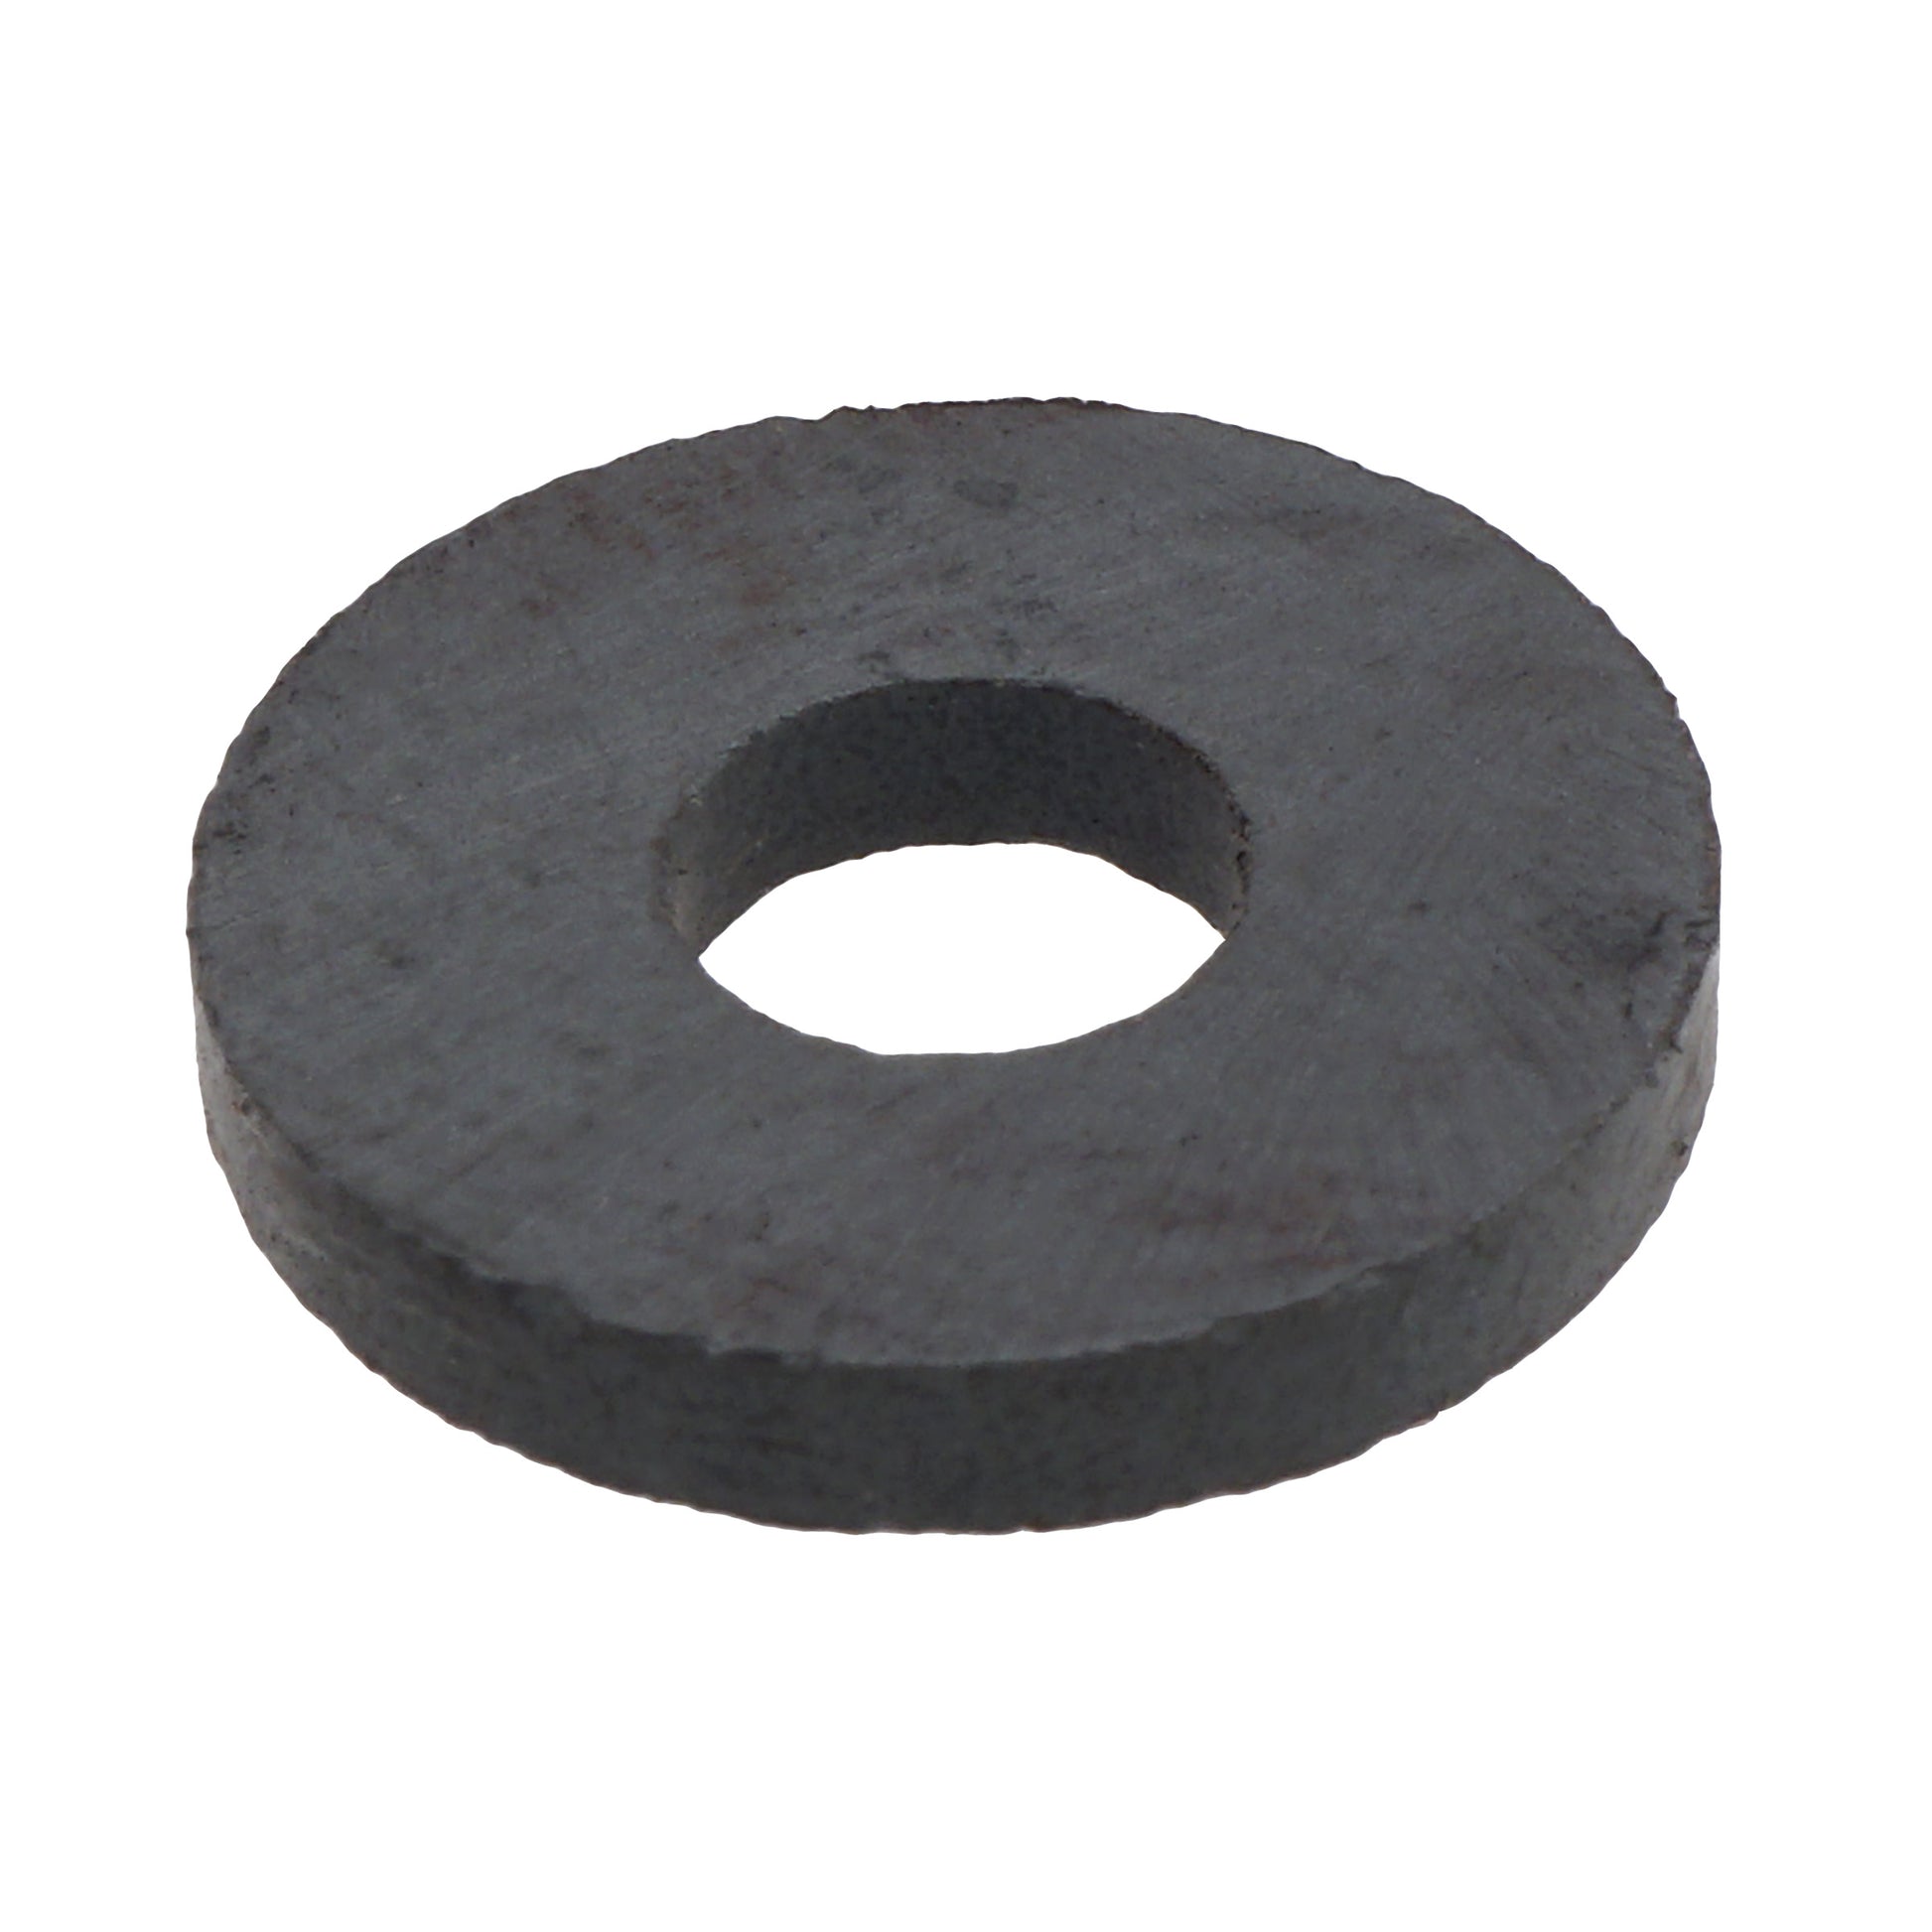 Load image into Gallery viewer, CR551209078 Ceramic Ring Magnet - 45 Degree Angle View